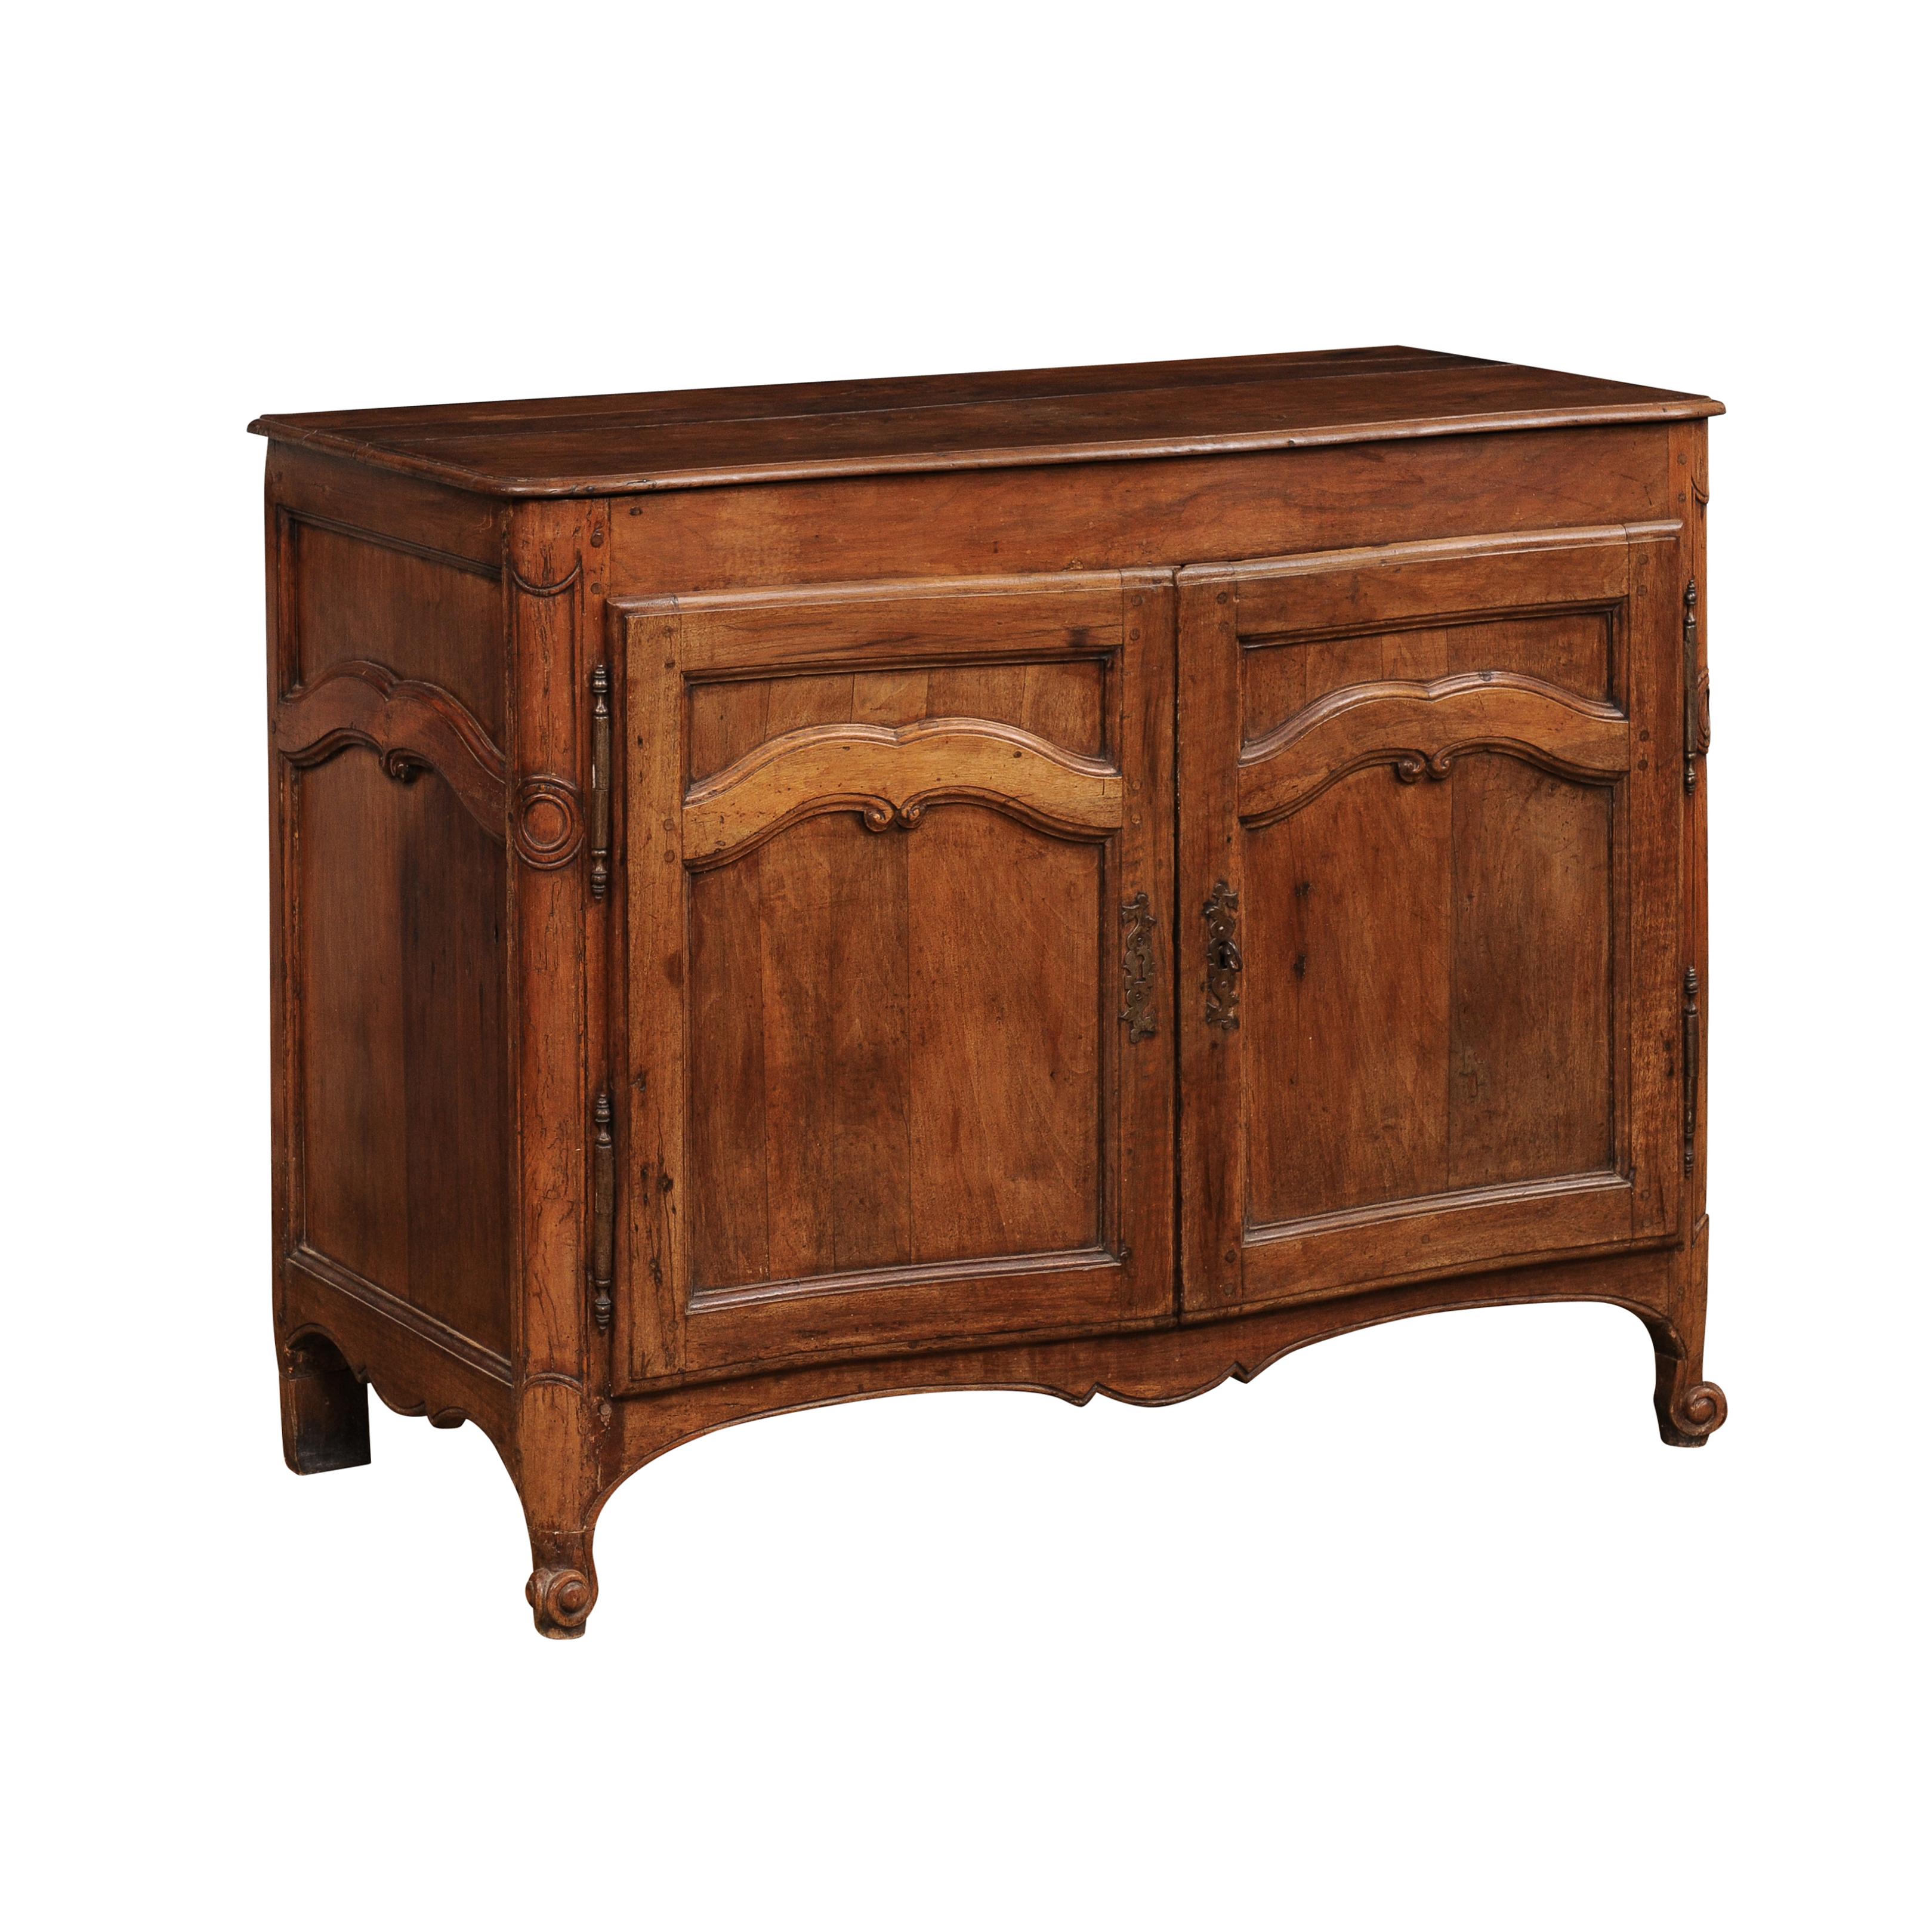 A French Louis XV period walnut buffet from the 18th century with two doors and carved arching accents. Immerse yourself in the timeless allure of French Louis XV design with this walnut buffet from the 18th century. Crafted with exquisite attention